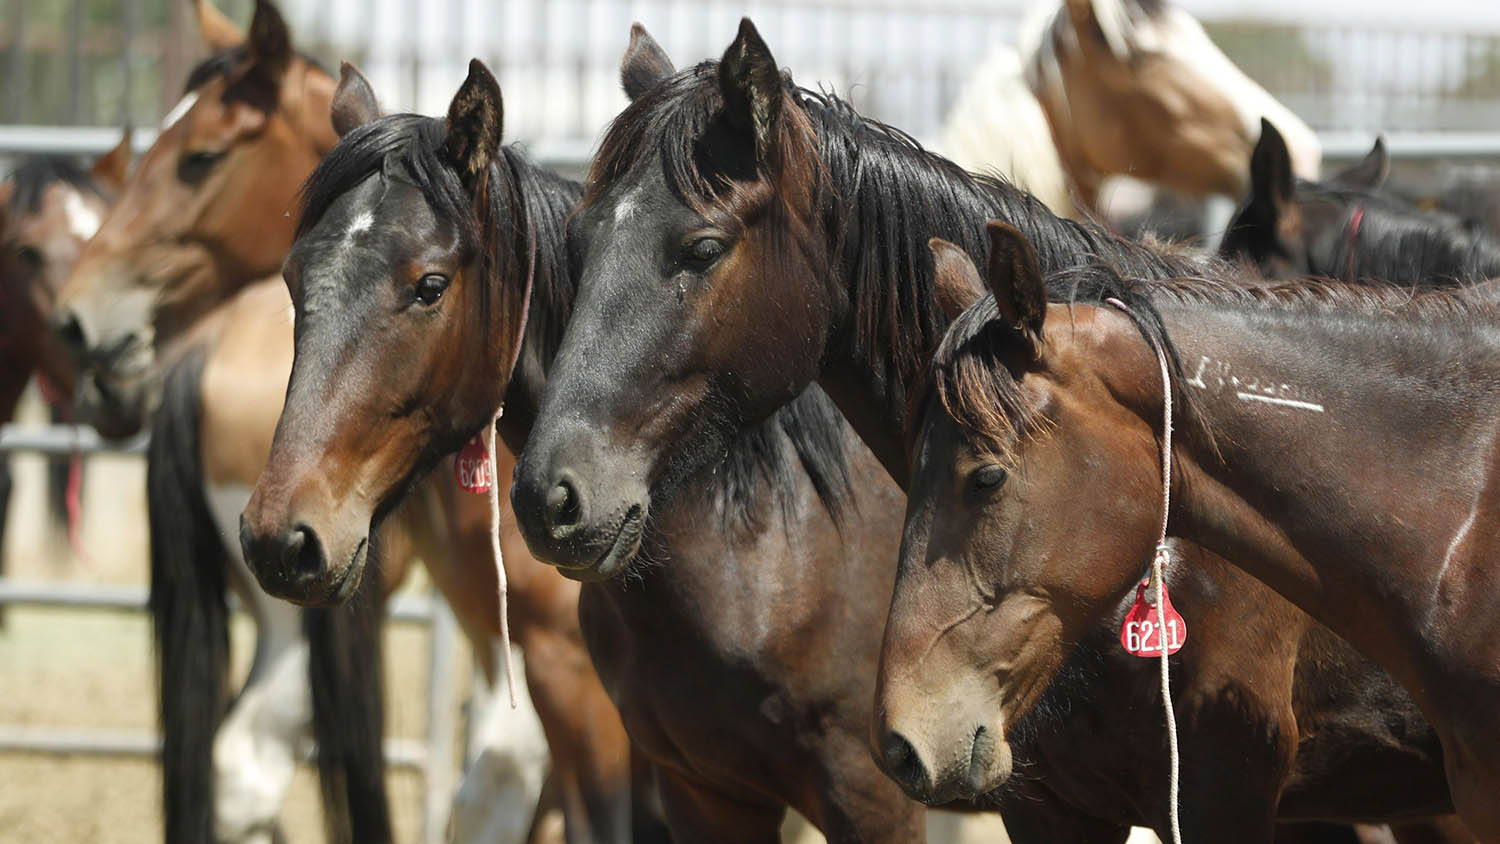 Hundreds Of Horses Up For Adoption Could Get Slaughtered